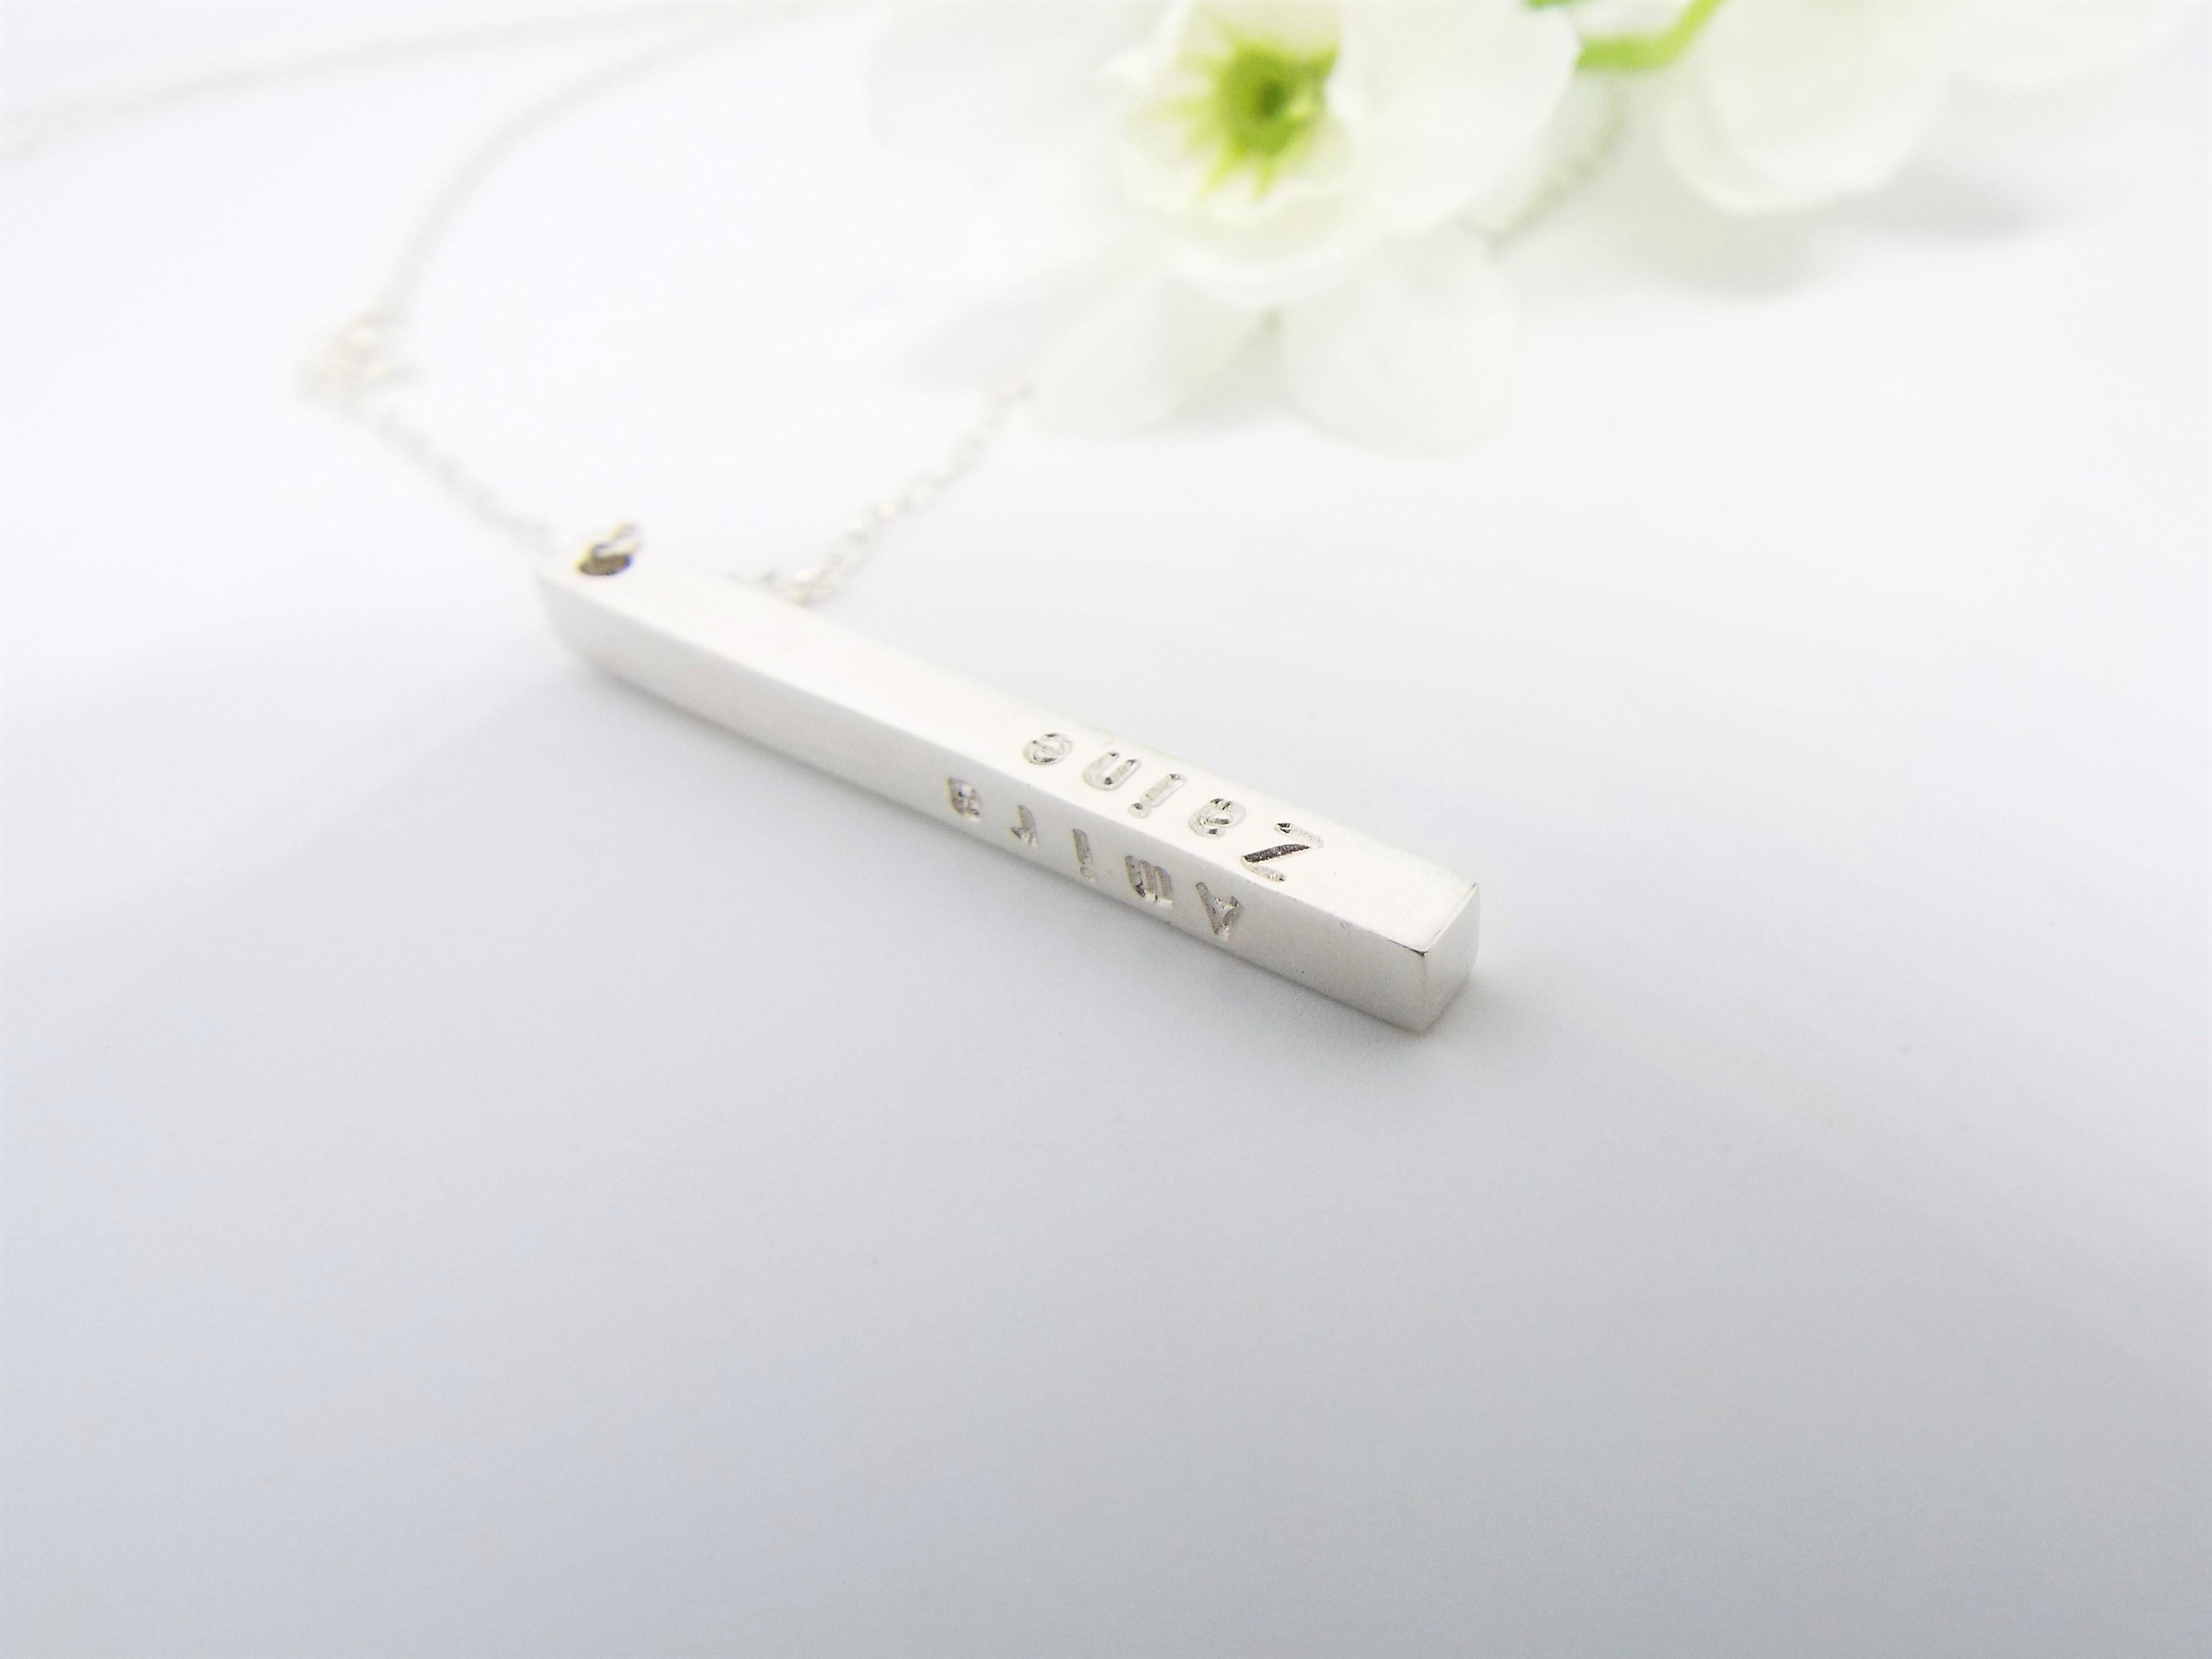 Silver Bar pendant  personalised with names and dates